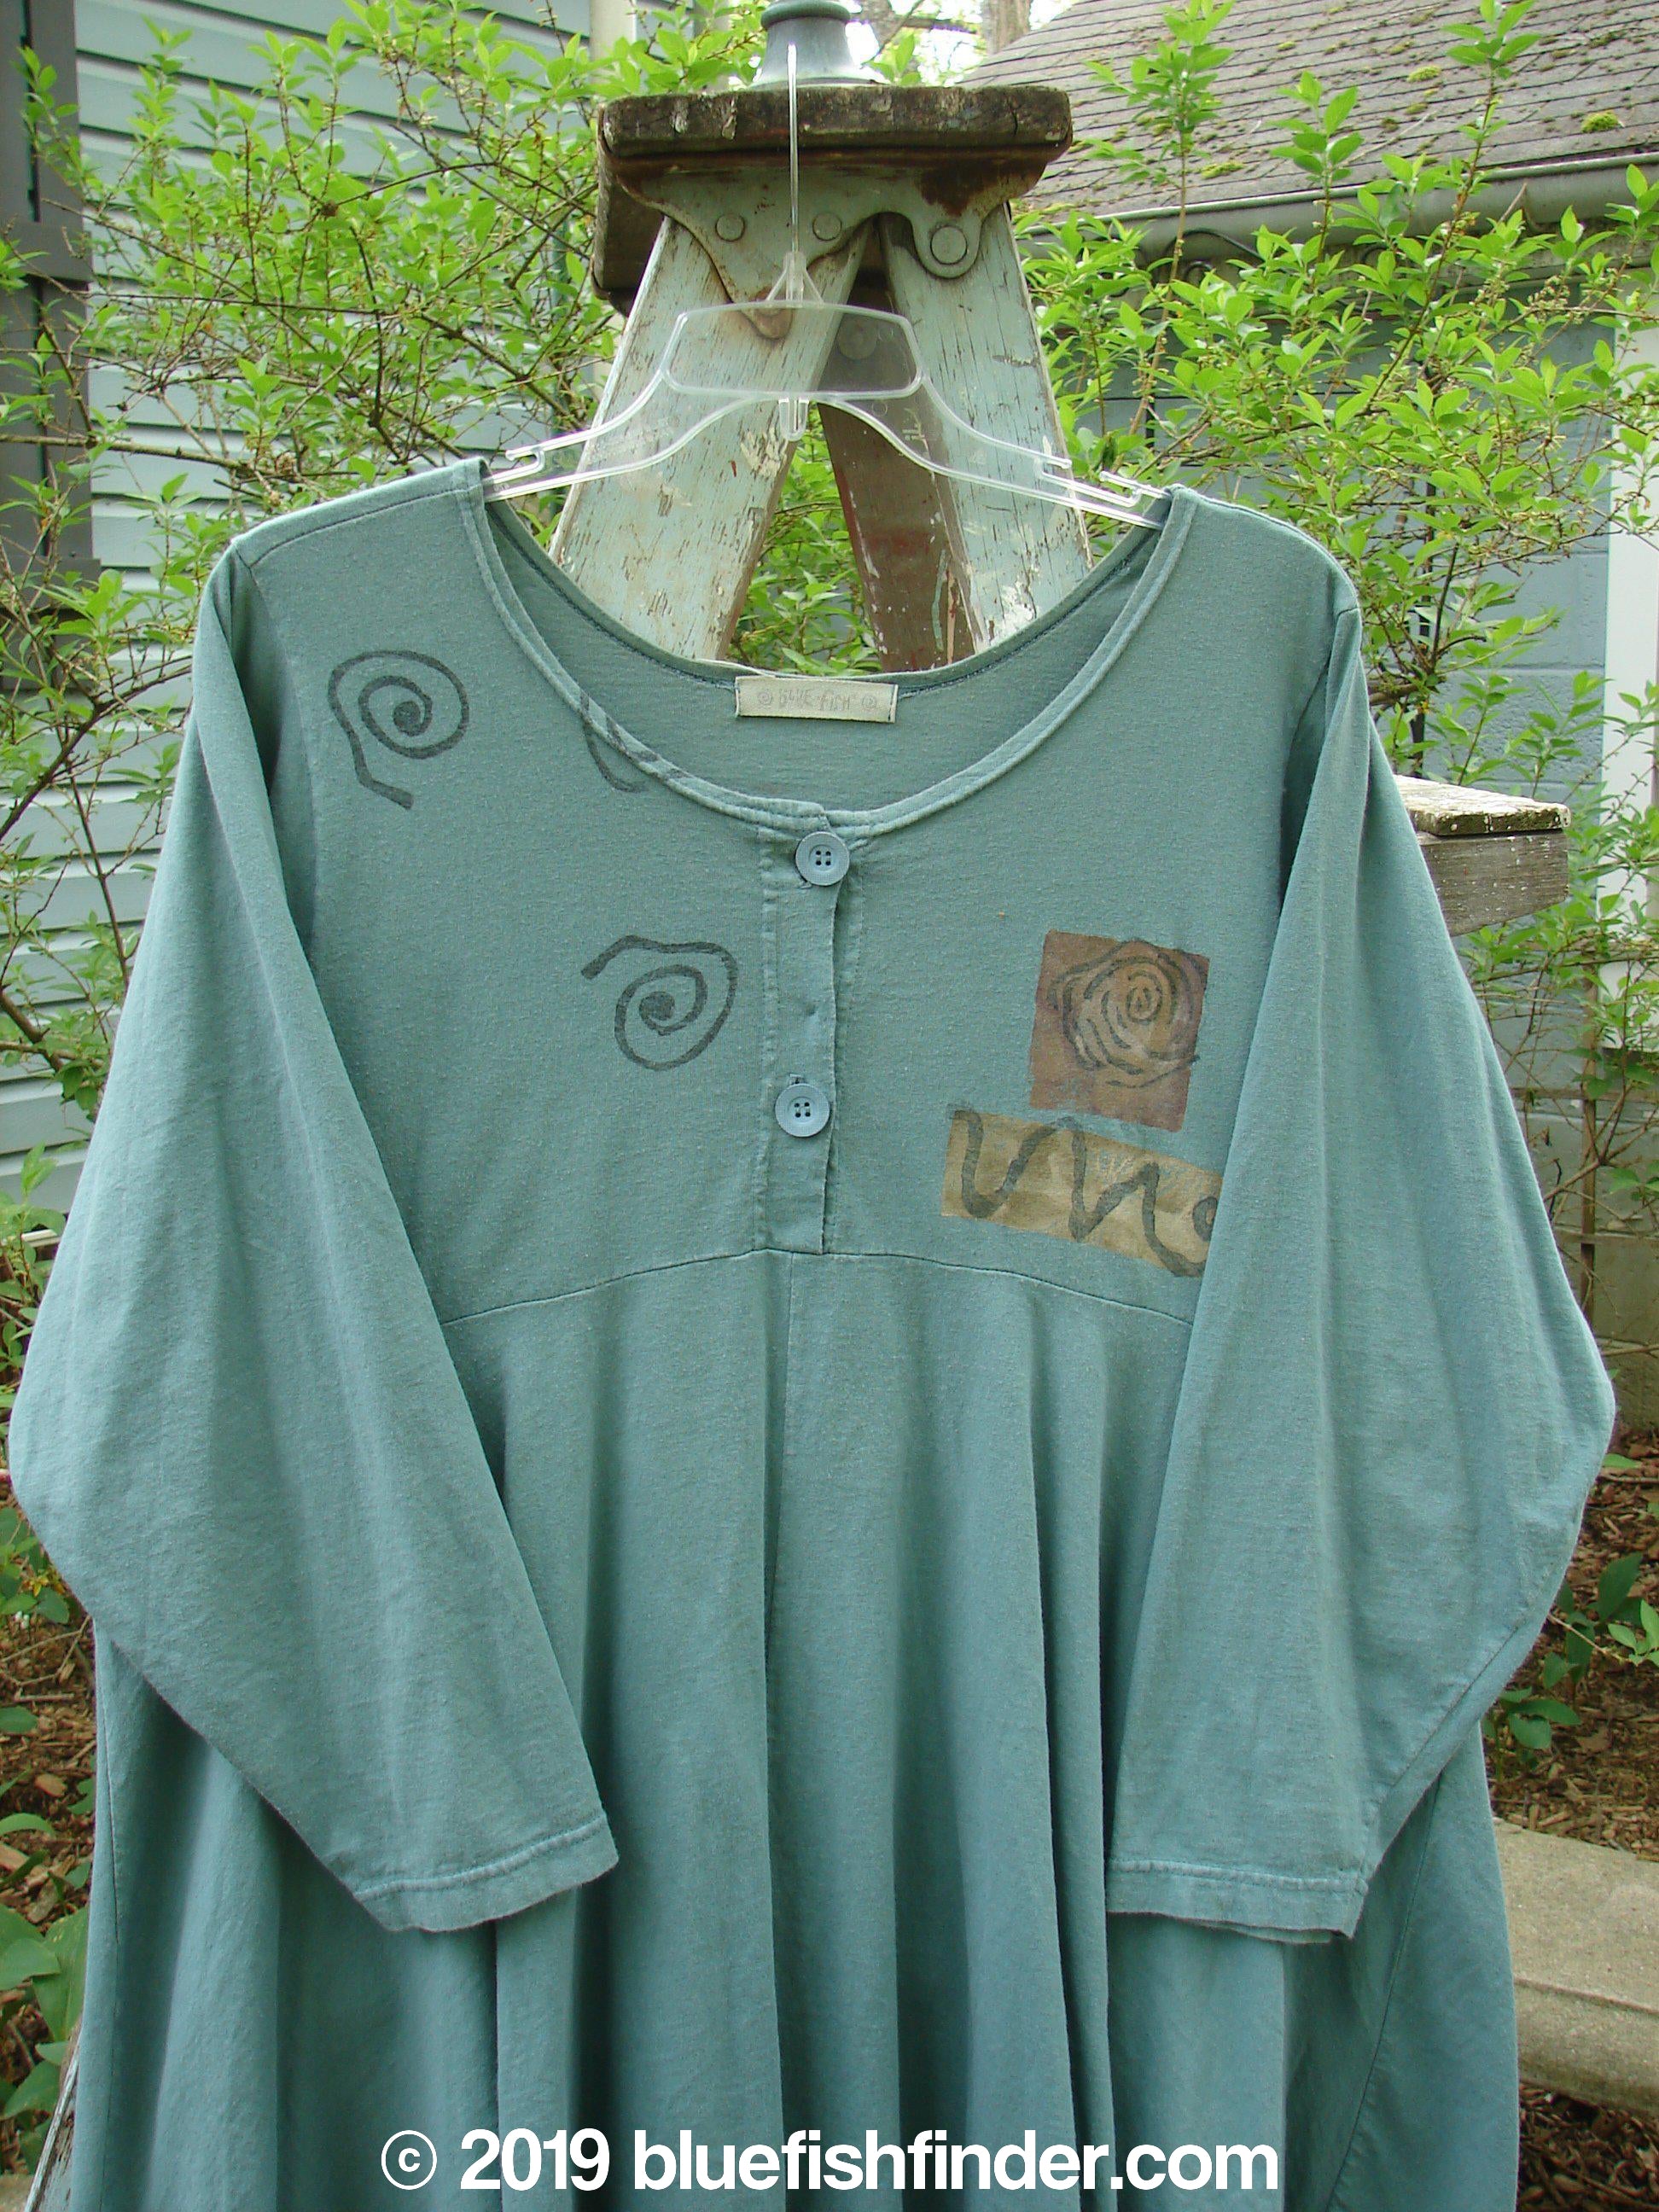 1994 Juniper Dress Swirl Leaf Sea Journey Size 2: A green shirt on a swinger with a plastic swinger on a wooden stand. A drawing of a spiral and a close-up of a drawing. A black spiral on a blue surface. A close-up of a sign, concrete floor, and painting.